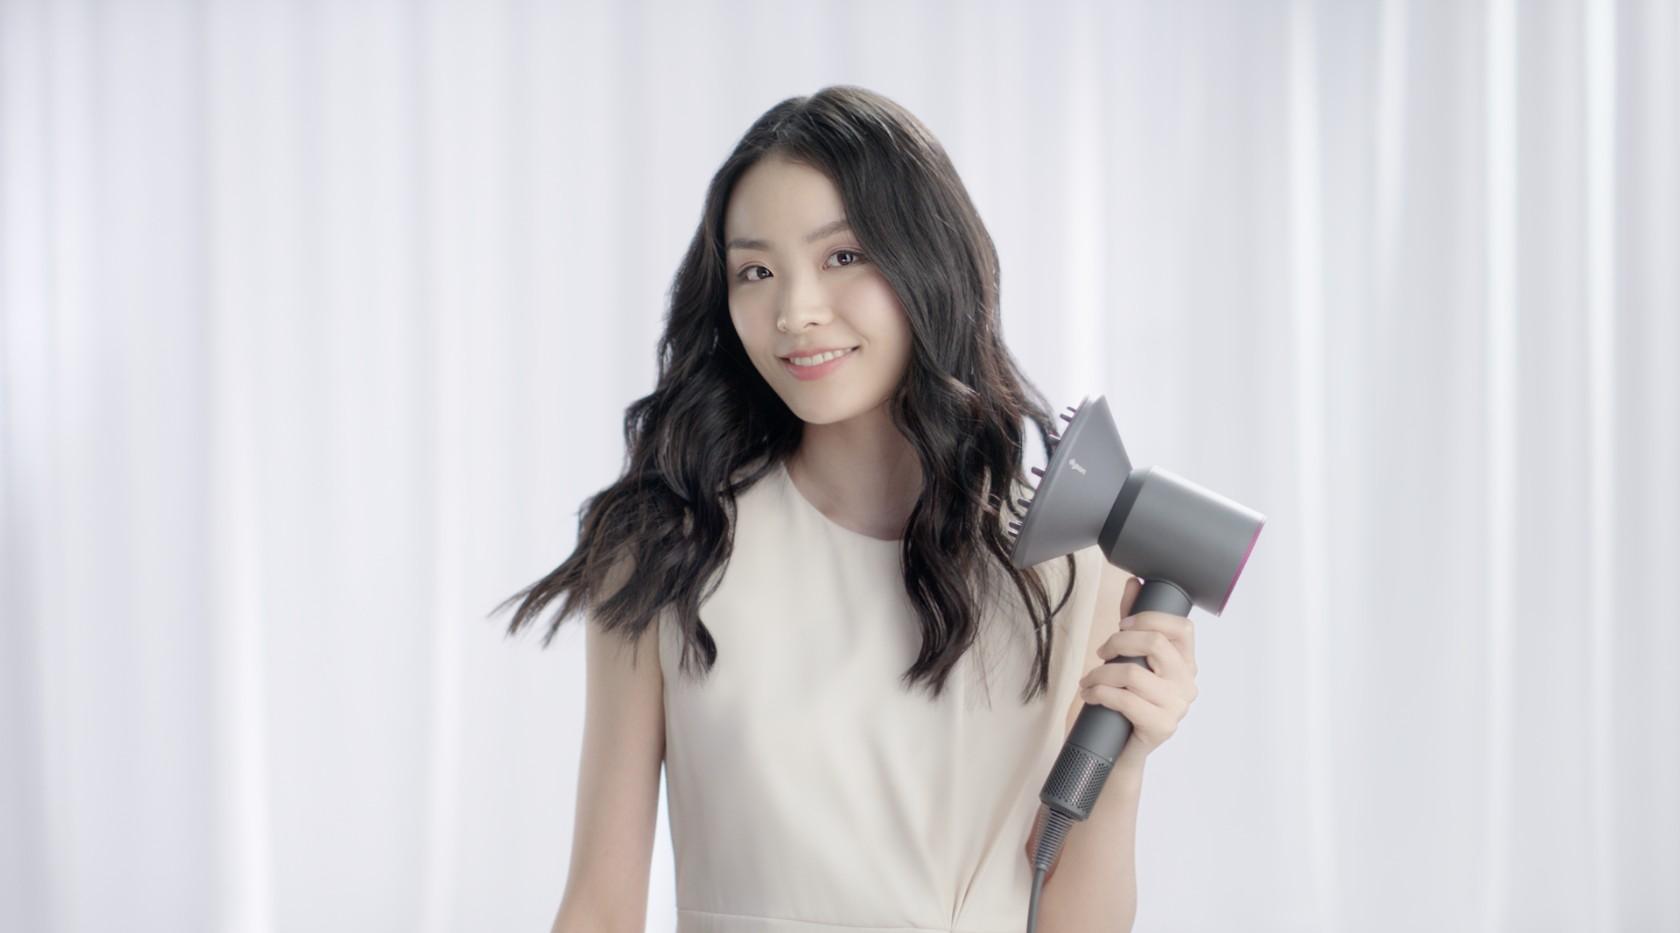 Dyson 戴森 #How to - Relaxed Waves